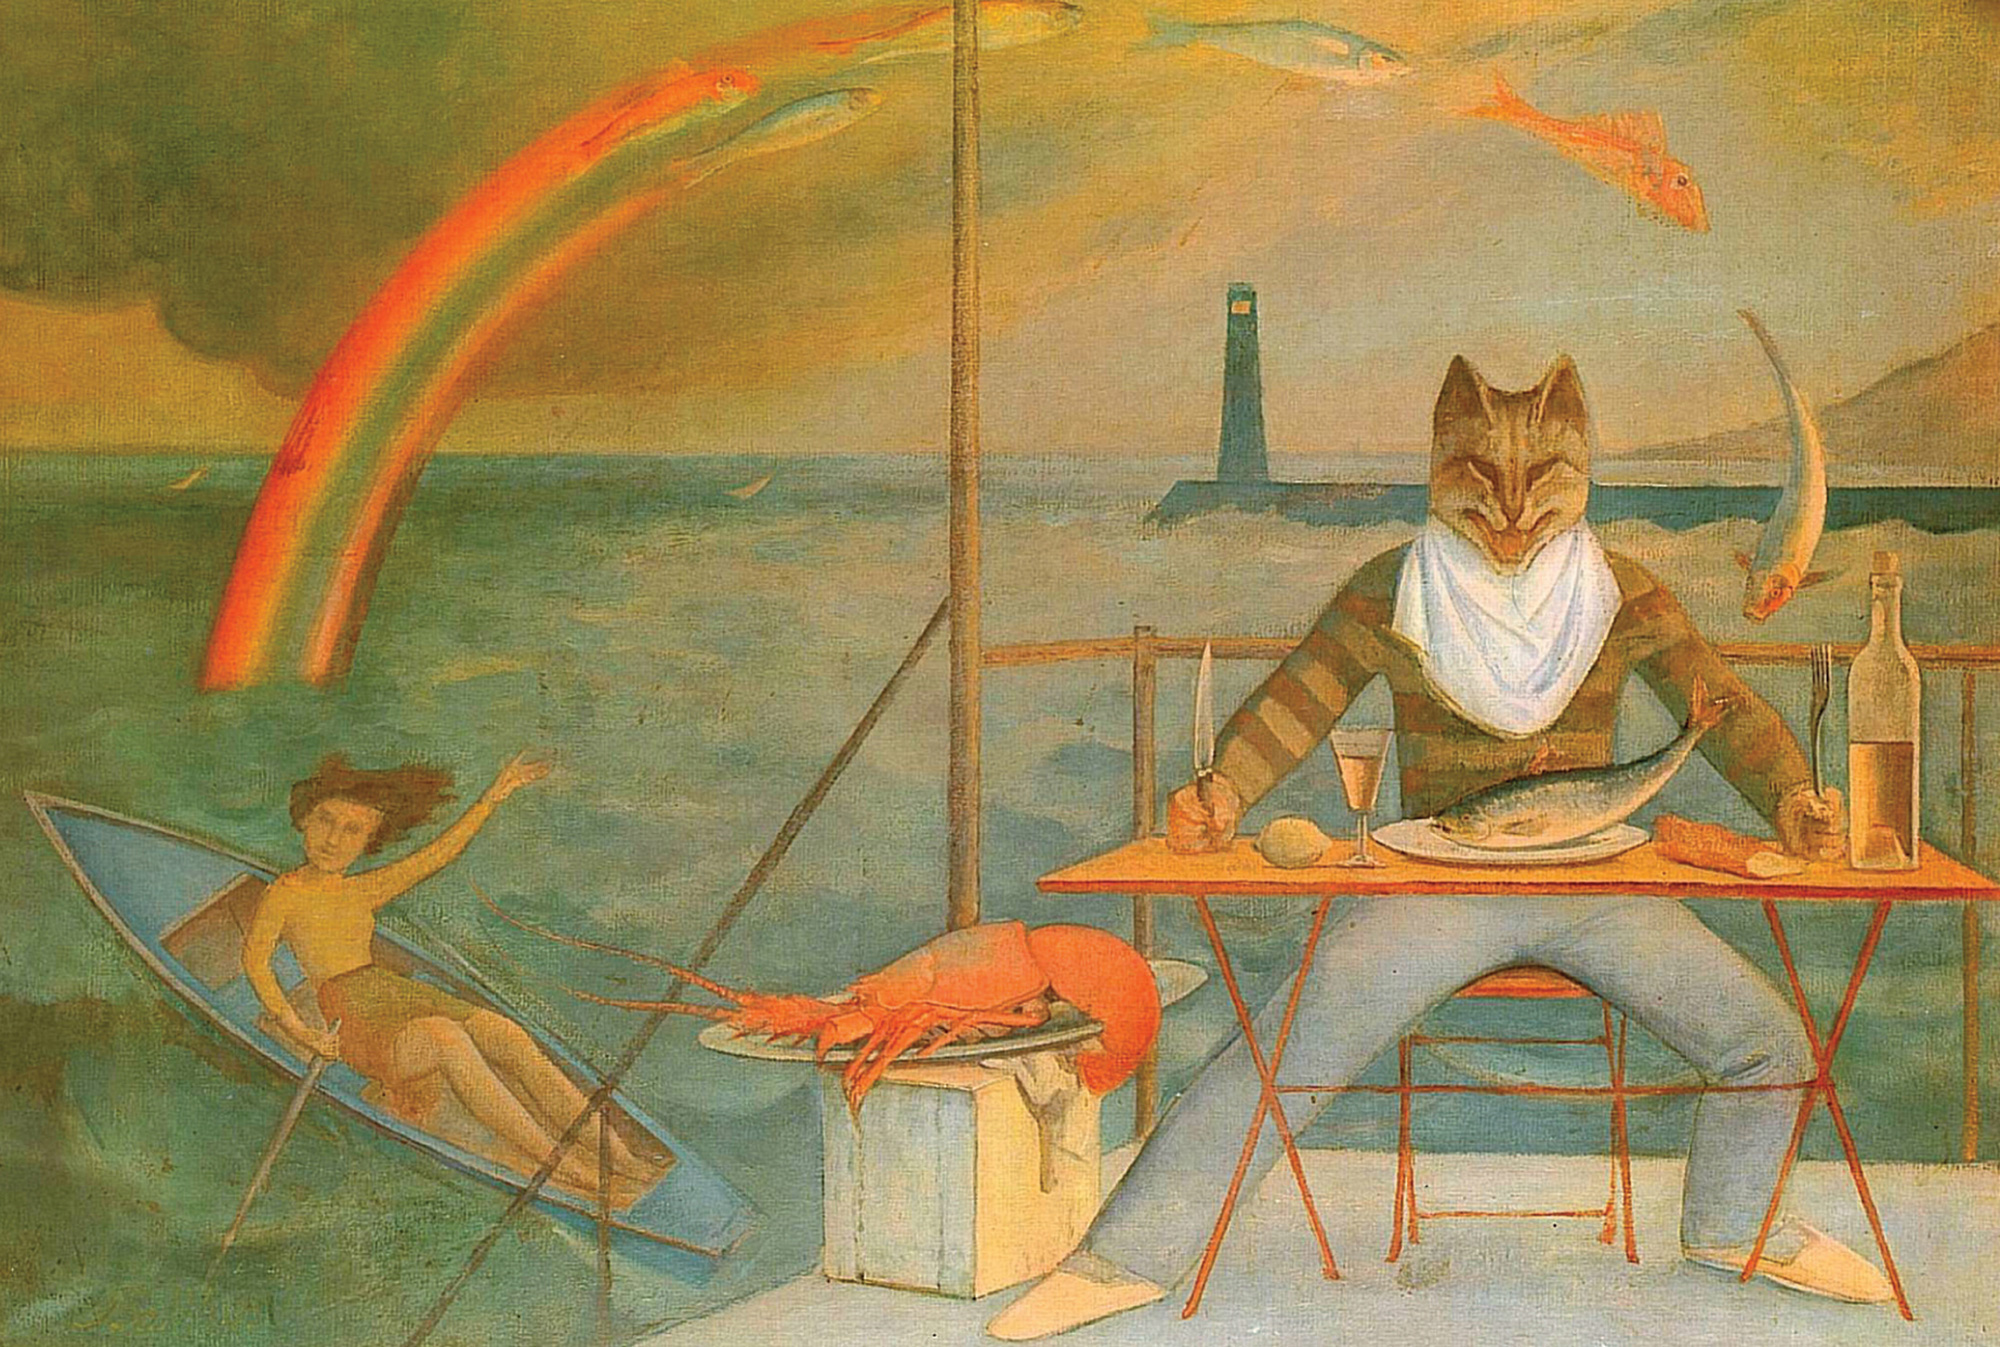 Balthus, The Cat of La Méditerranée, 1949. Painting made for La Méditerranée, a Paris restaurant frequented by the artist. The young woman in the boat was modeled on the daughter of Balthus’s friend Georges Bataille.